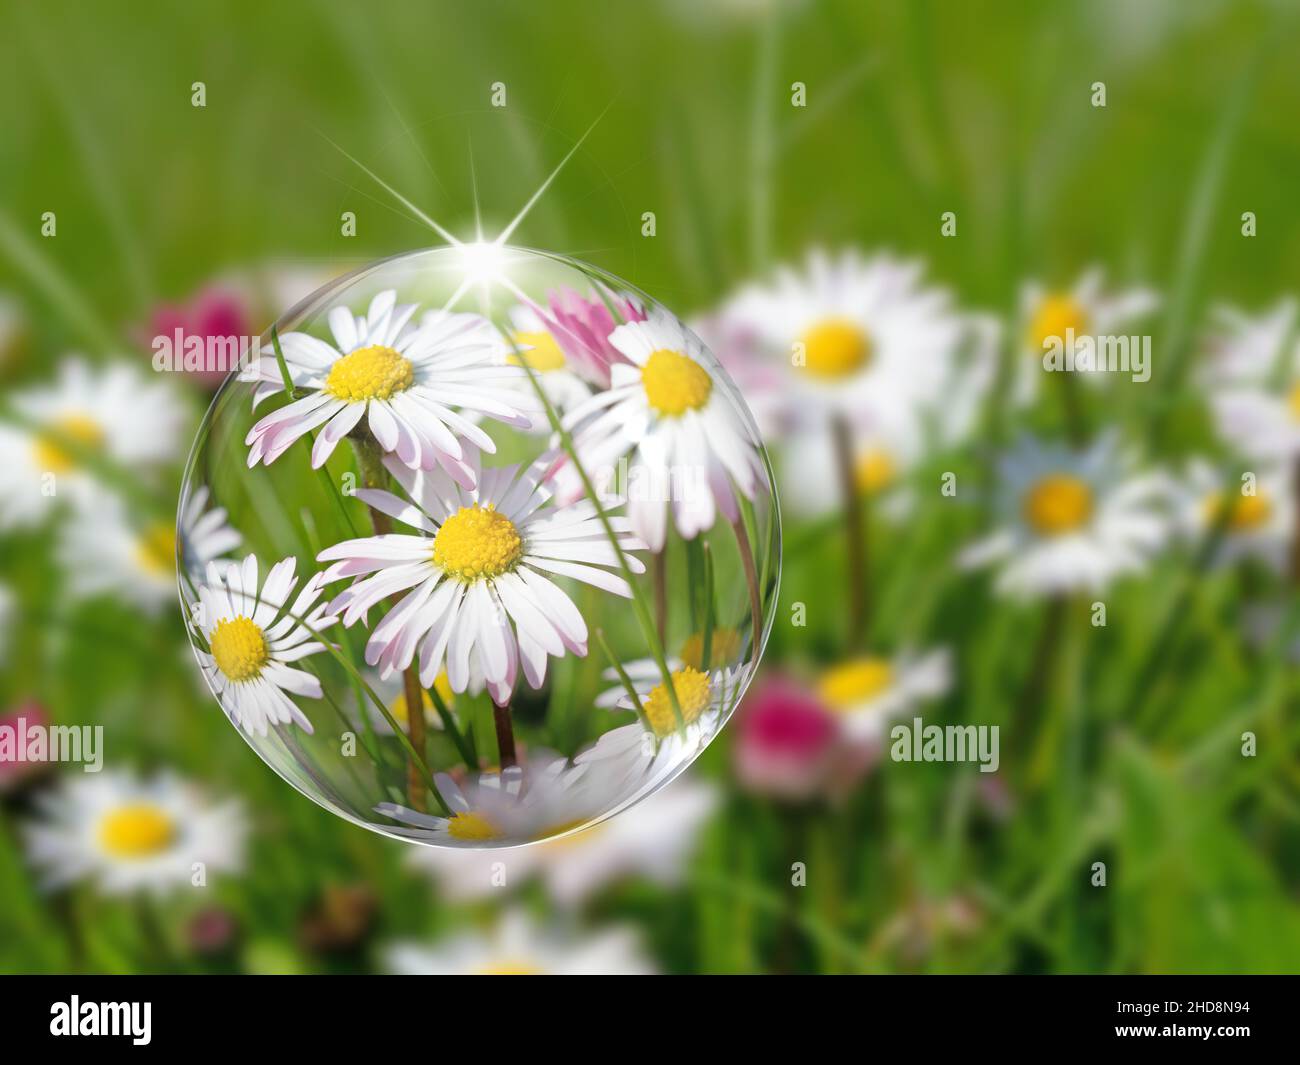 Daisies, Bellis perennis, in a close-up, Illustration Stock Photo